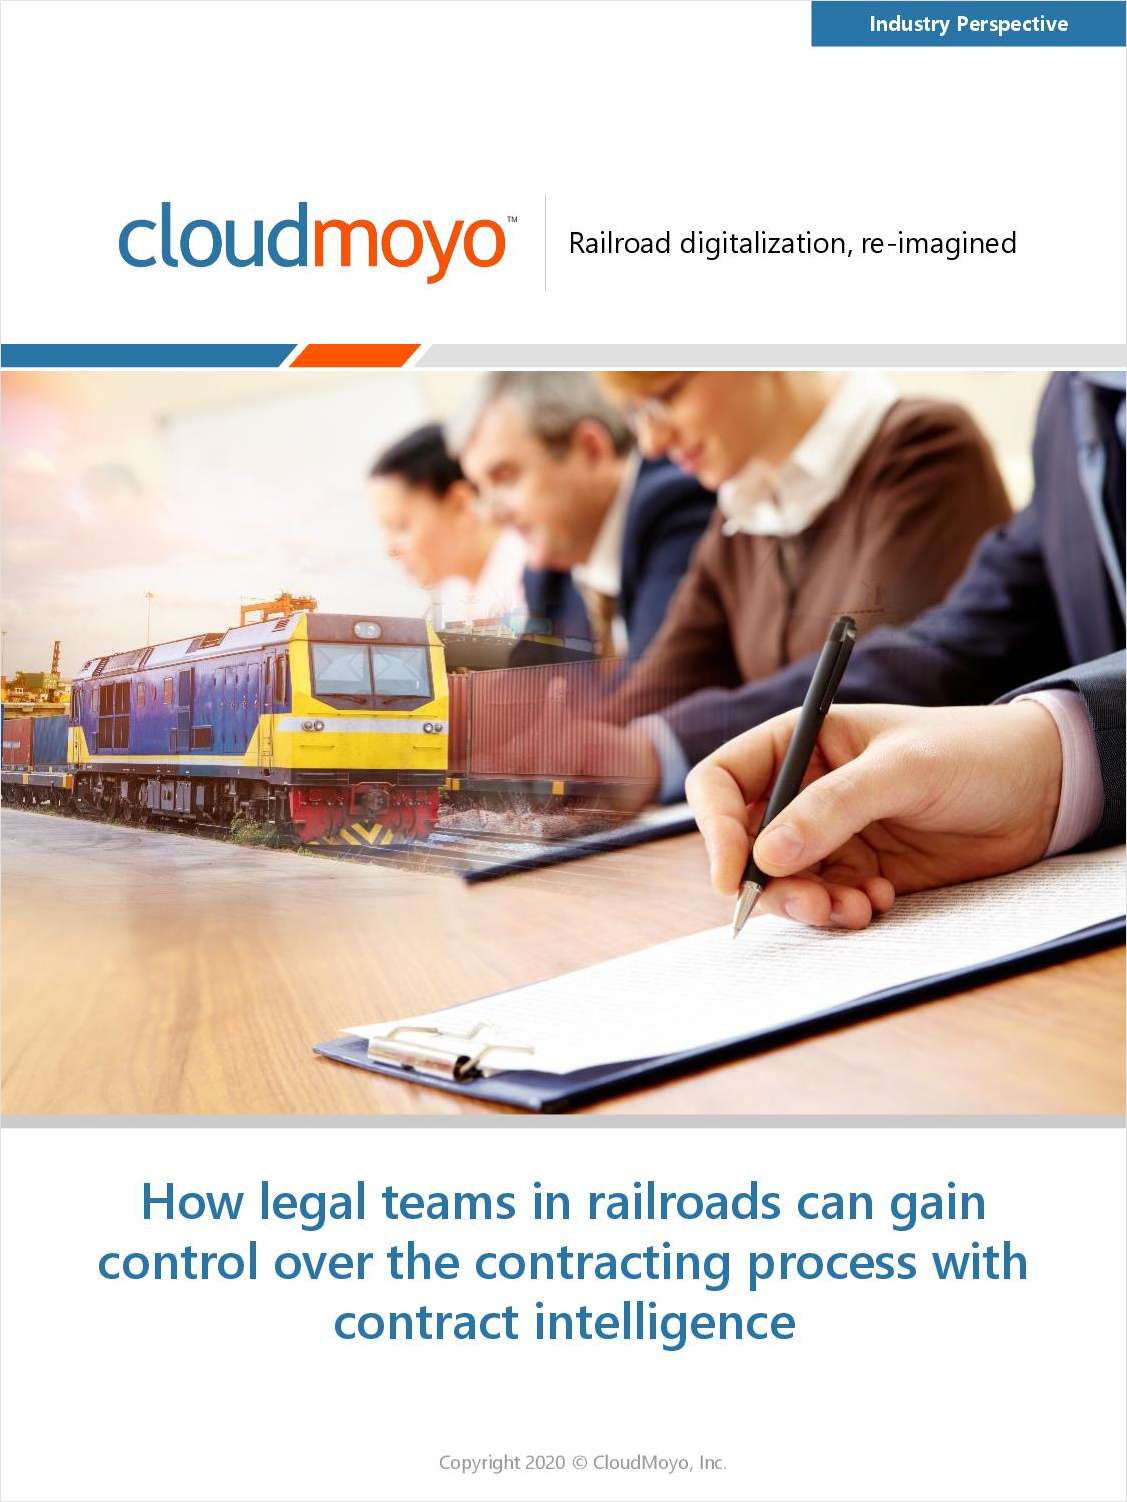 How Legal Teams in Railroads Can Gain Control Over the Contracting Process With Contract Intelligence